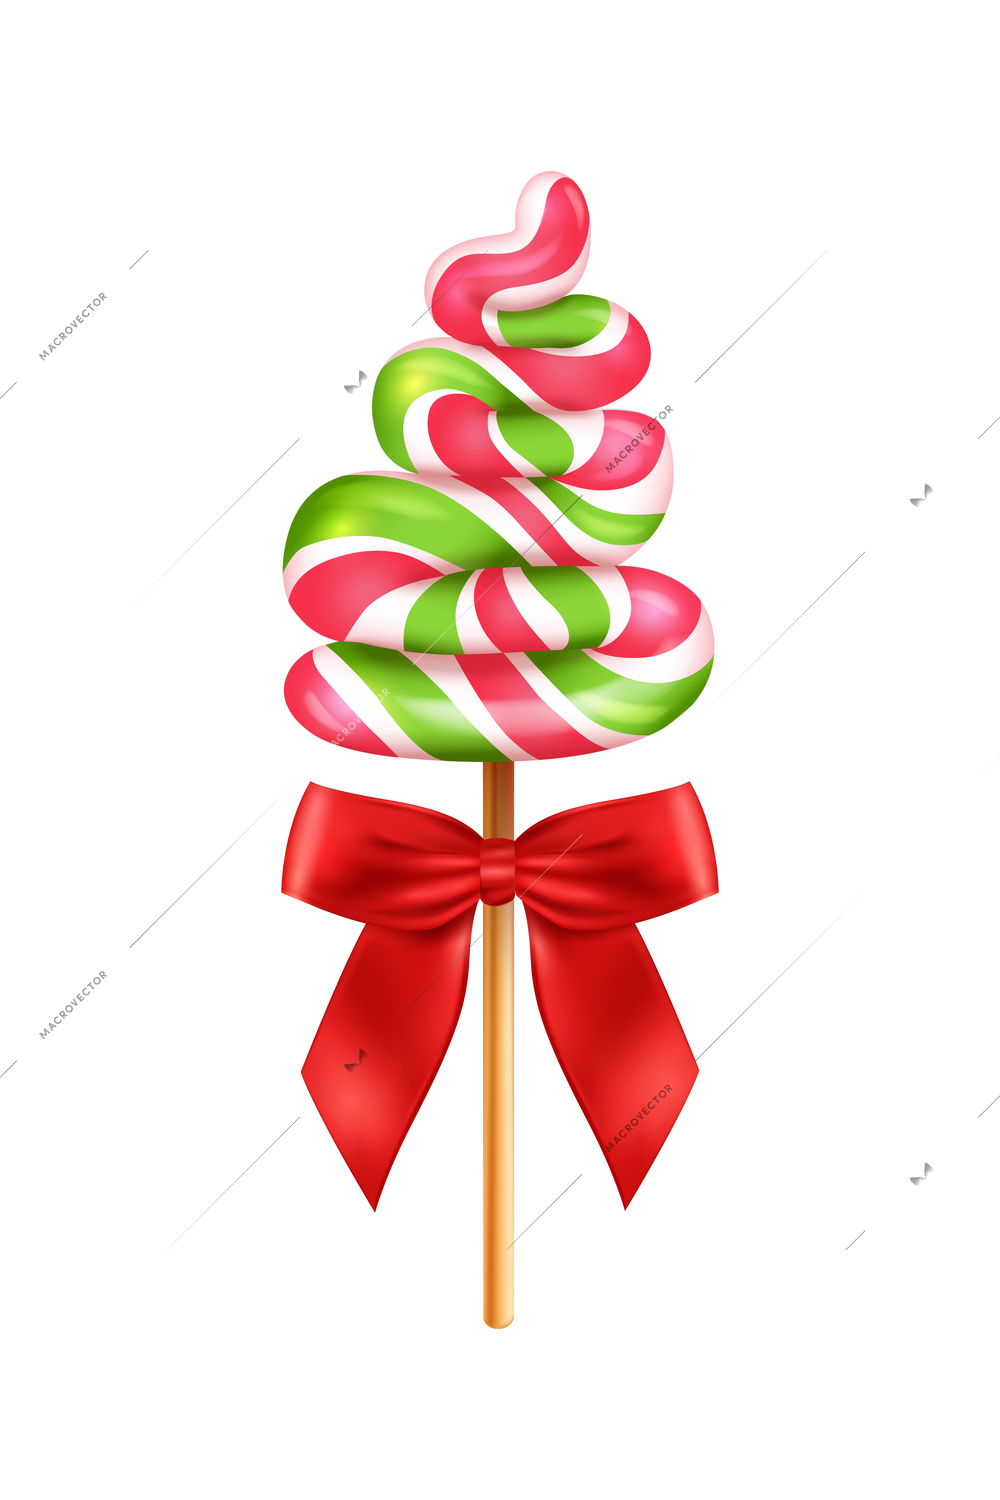 Realistic lollipop red bow composition with isolated image of candy on stick with tree shaped sugar vector illustration